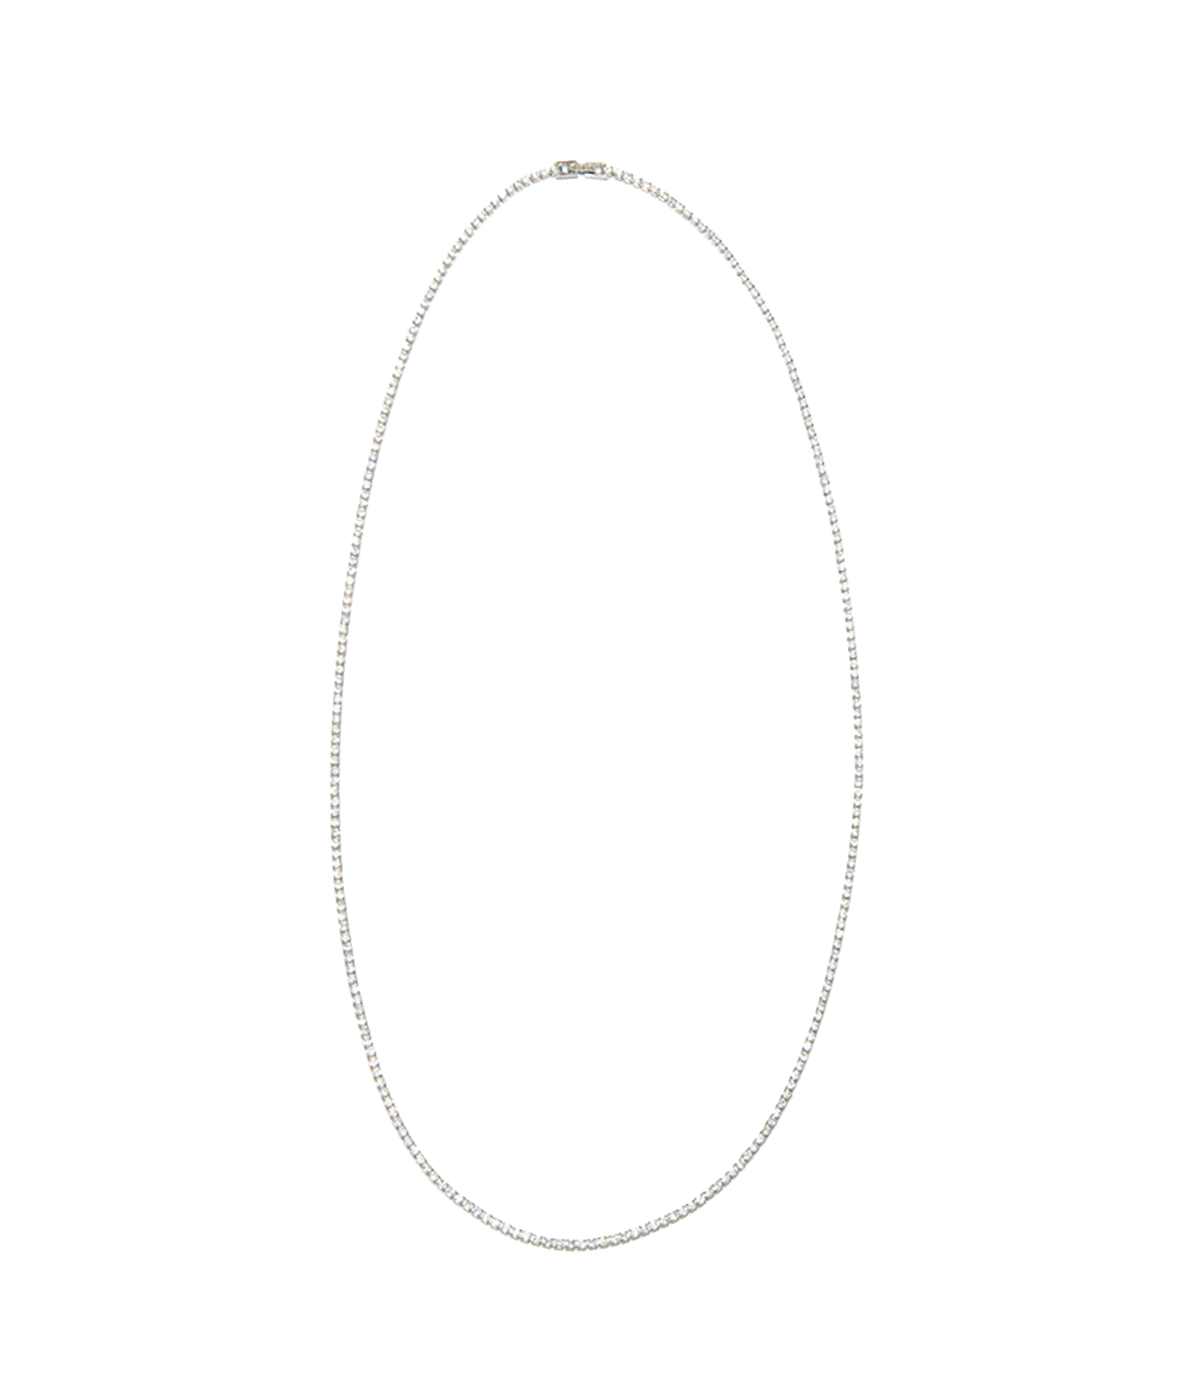 A 24 inch tennis necklace, with crystal embellishments and yellow gold clasp. Date night, timeless, trendy, made internationally. 